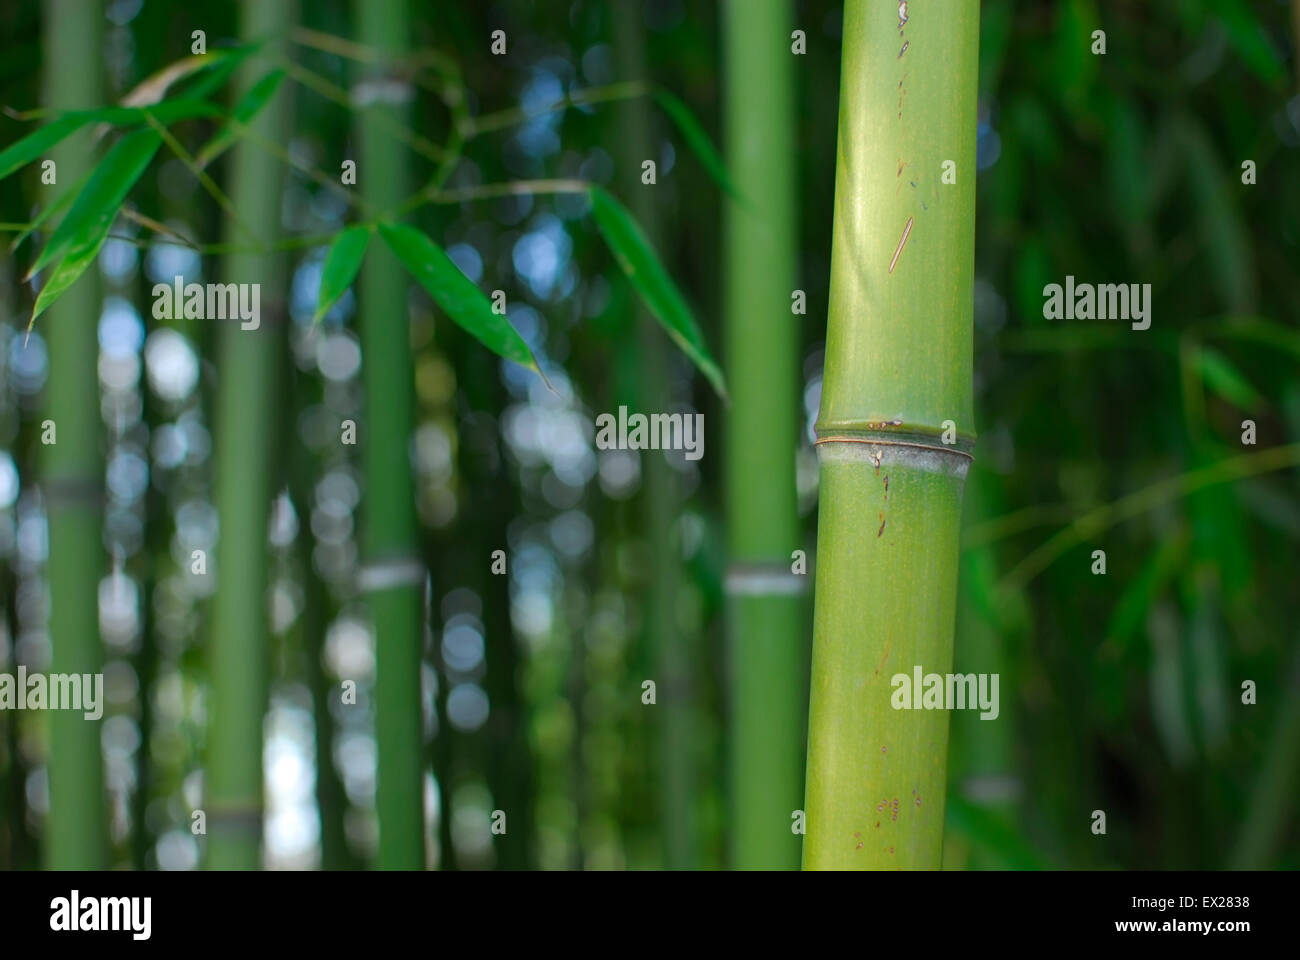 Bamboo Forest, Green Stems and Leaves. Stock Photo